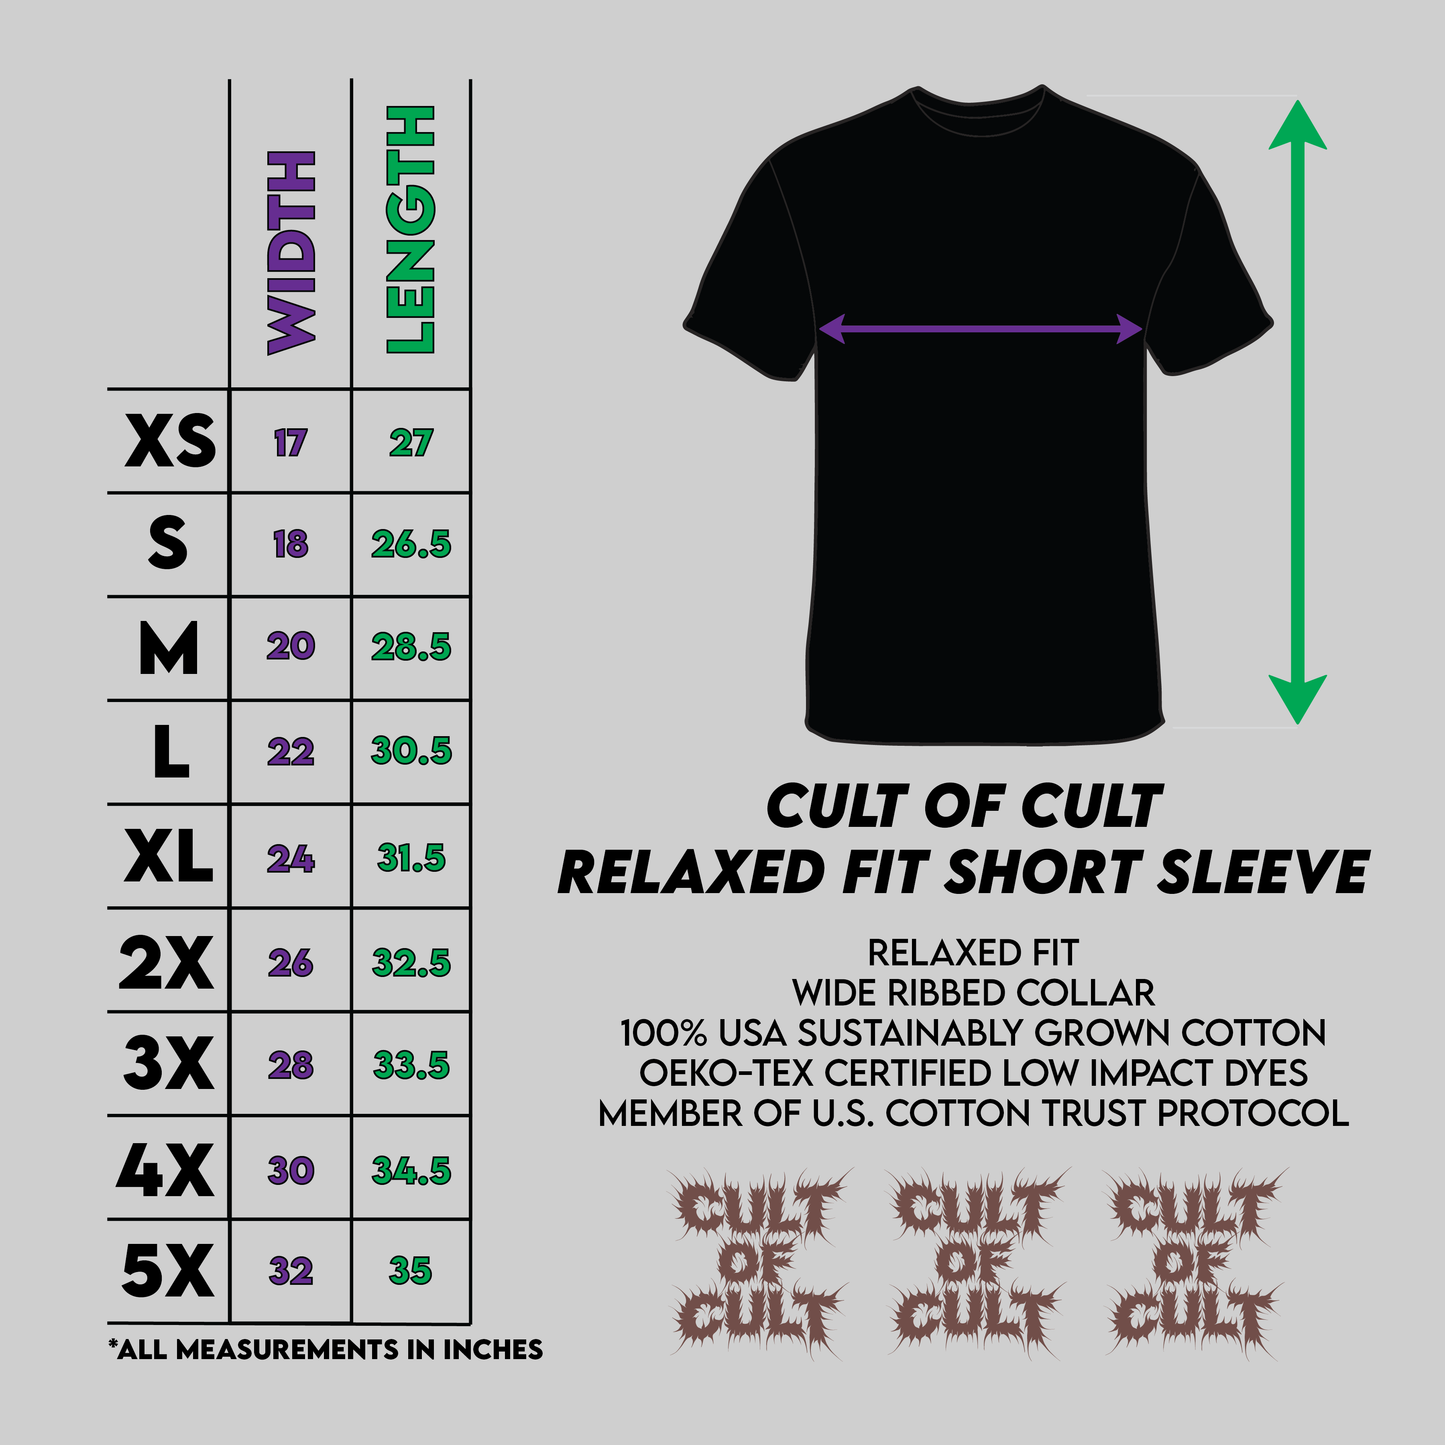 Cult of Cult short sleeve sizing chart